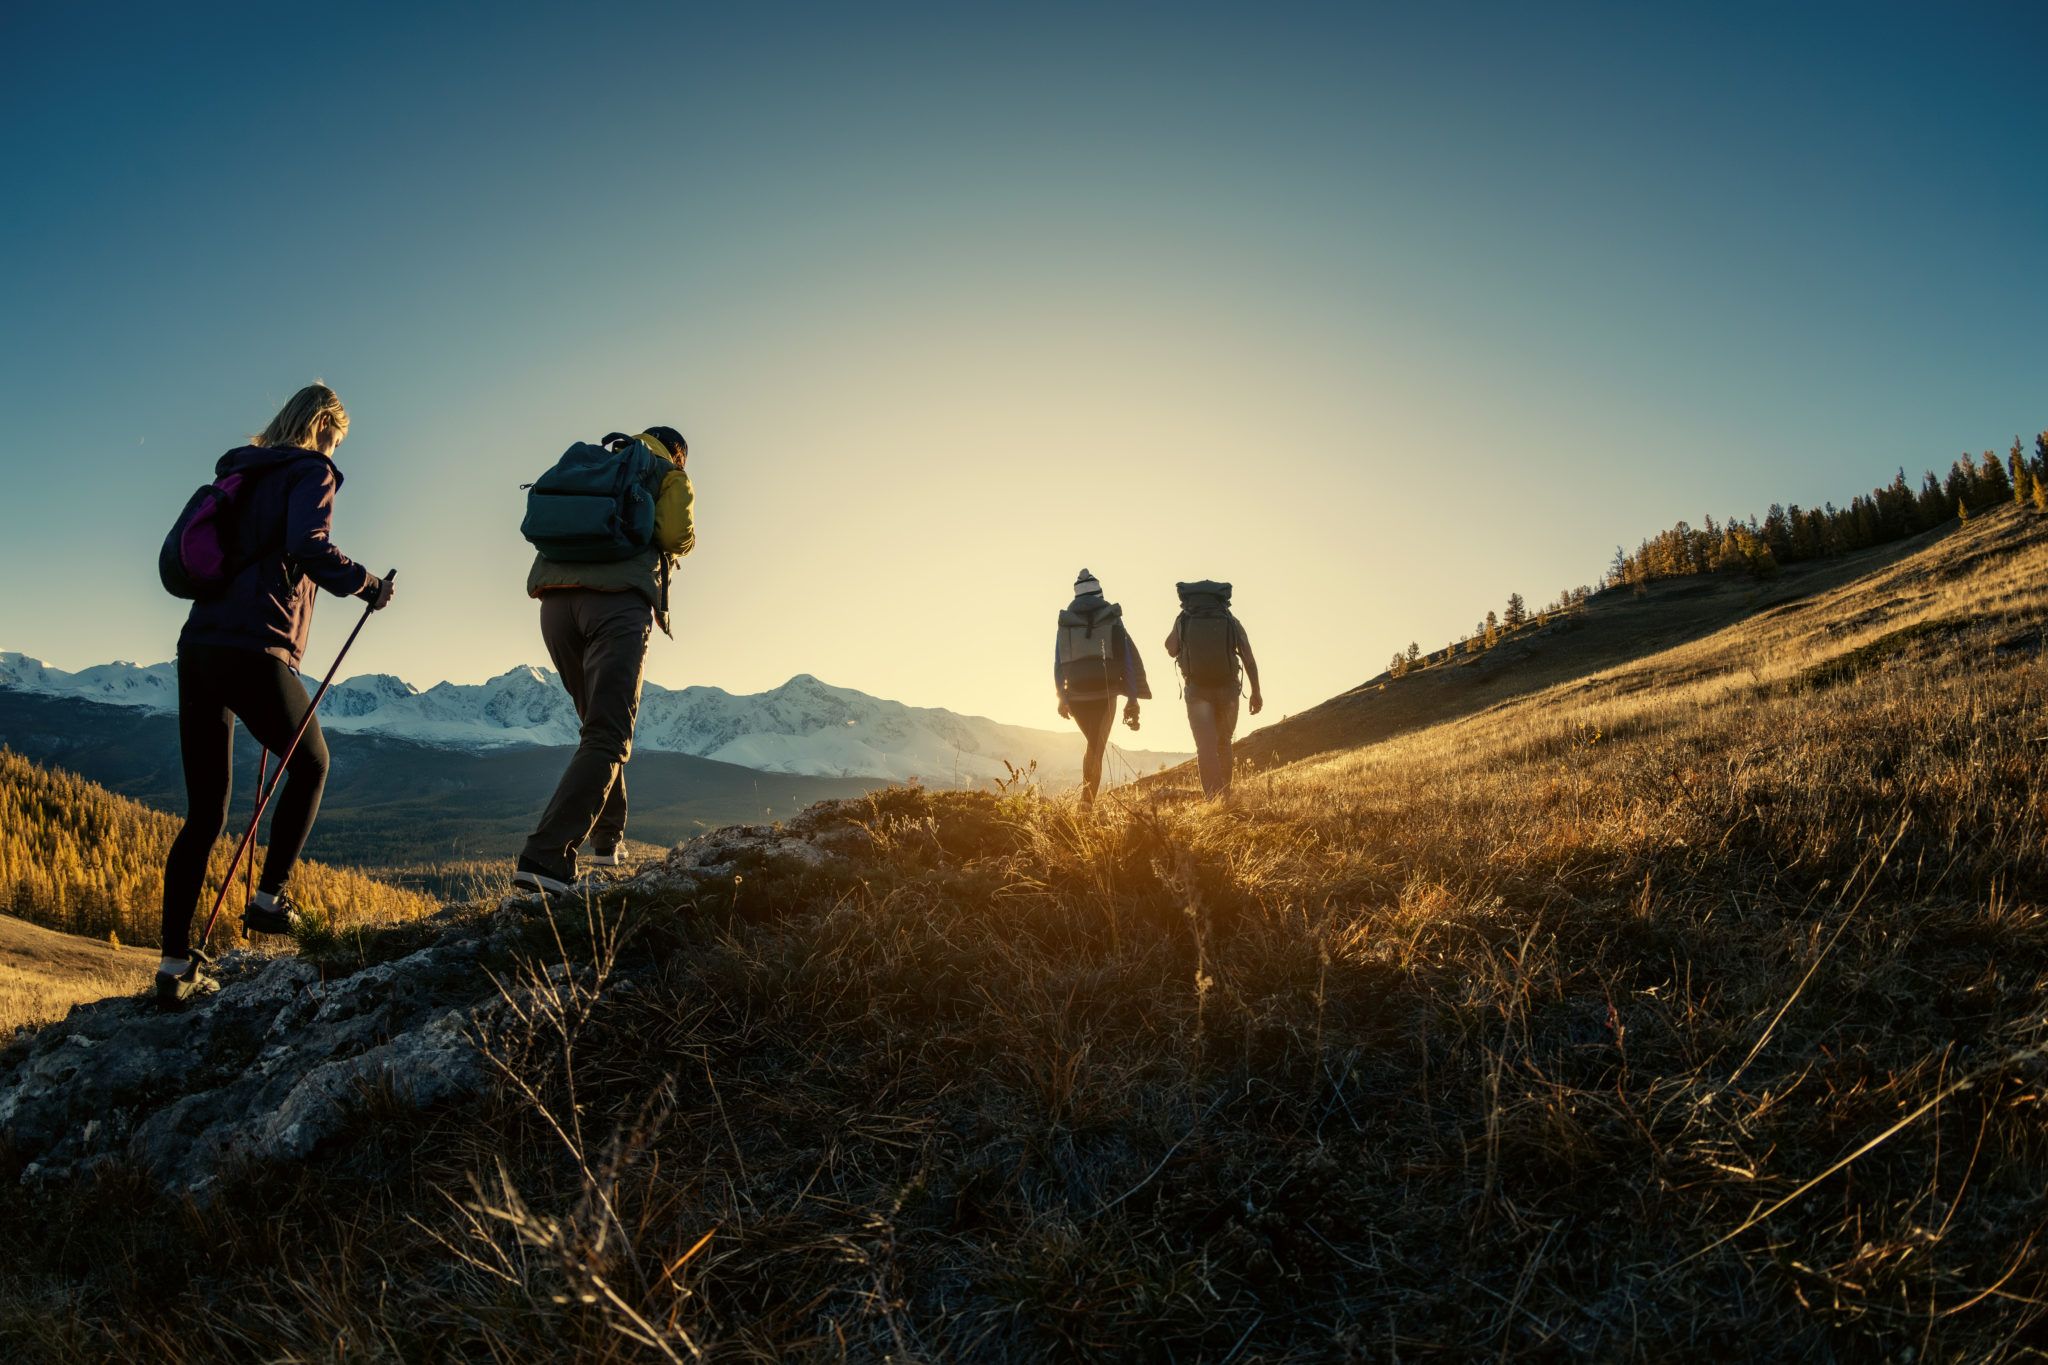 Don’t miss this stunning sunset hike taking place next month